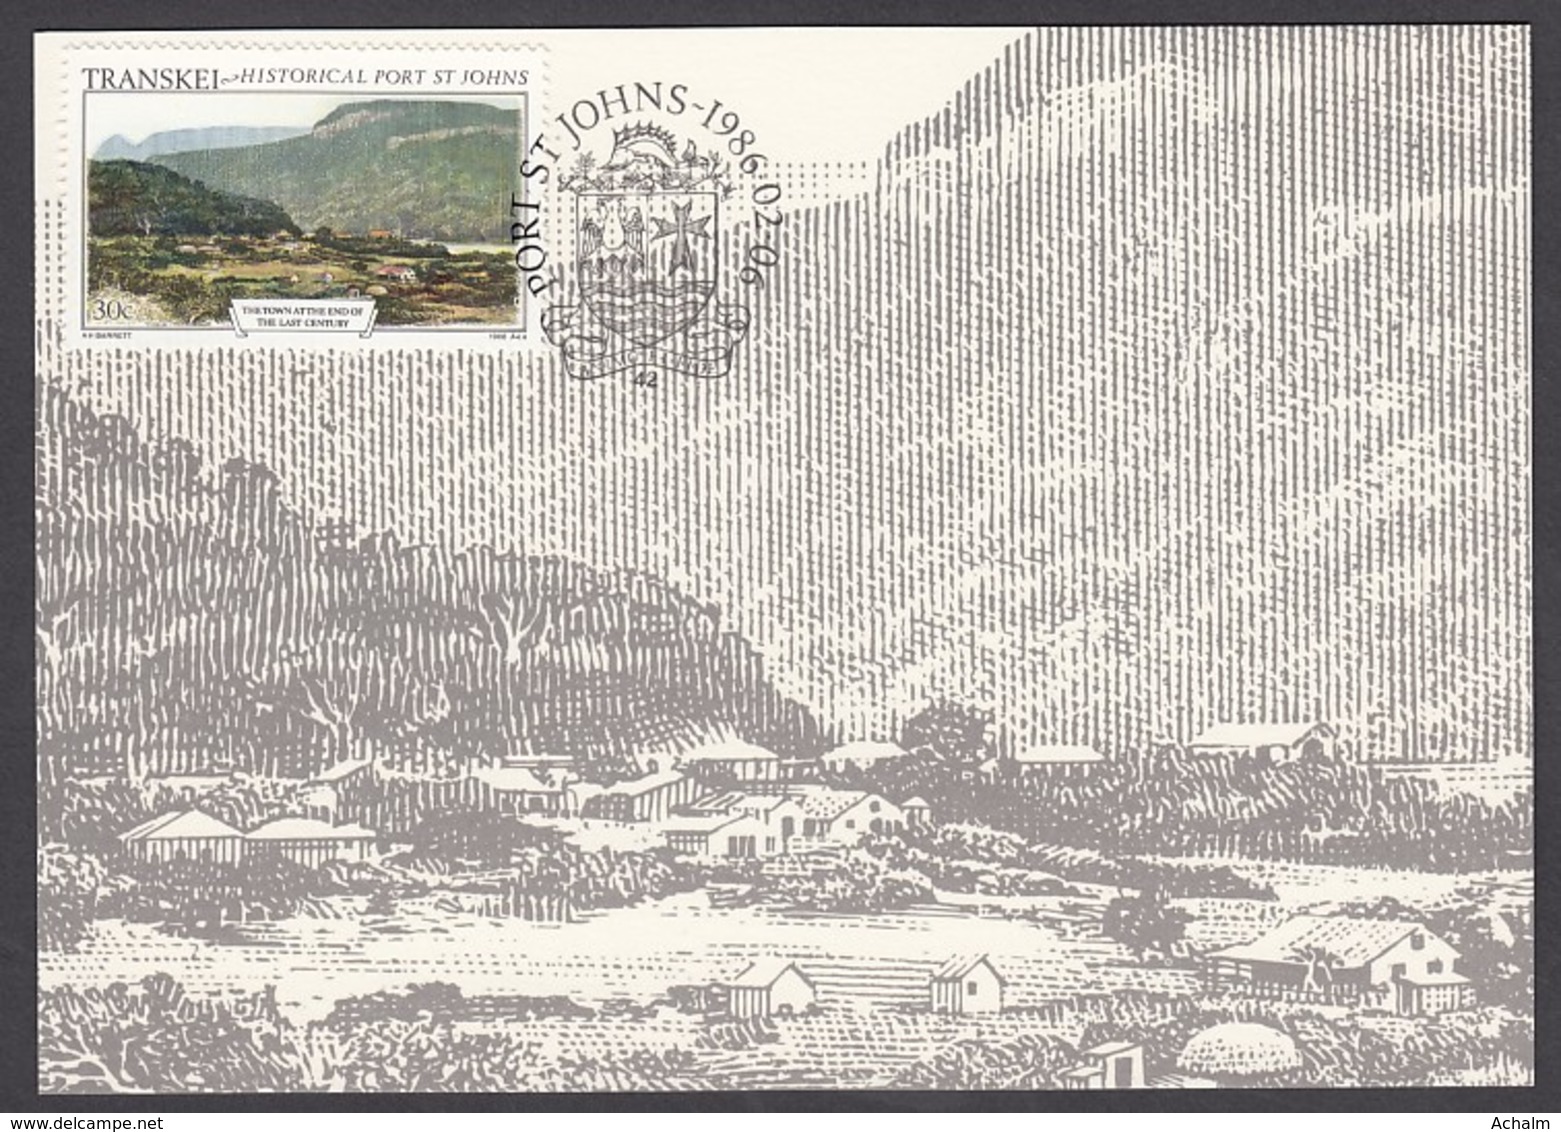 Transkei - Maximum Card Of 1986 - MiNr. 183 - Old Views Of Port St. Johns - The City At The End - Transkei